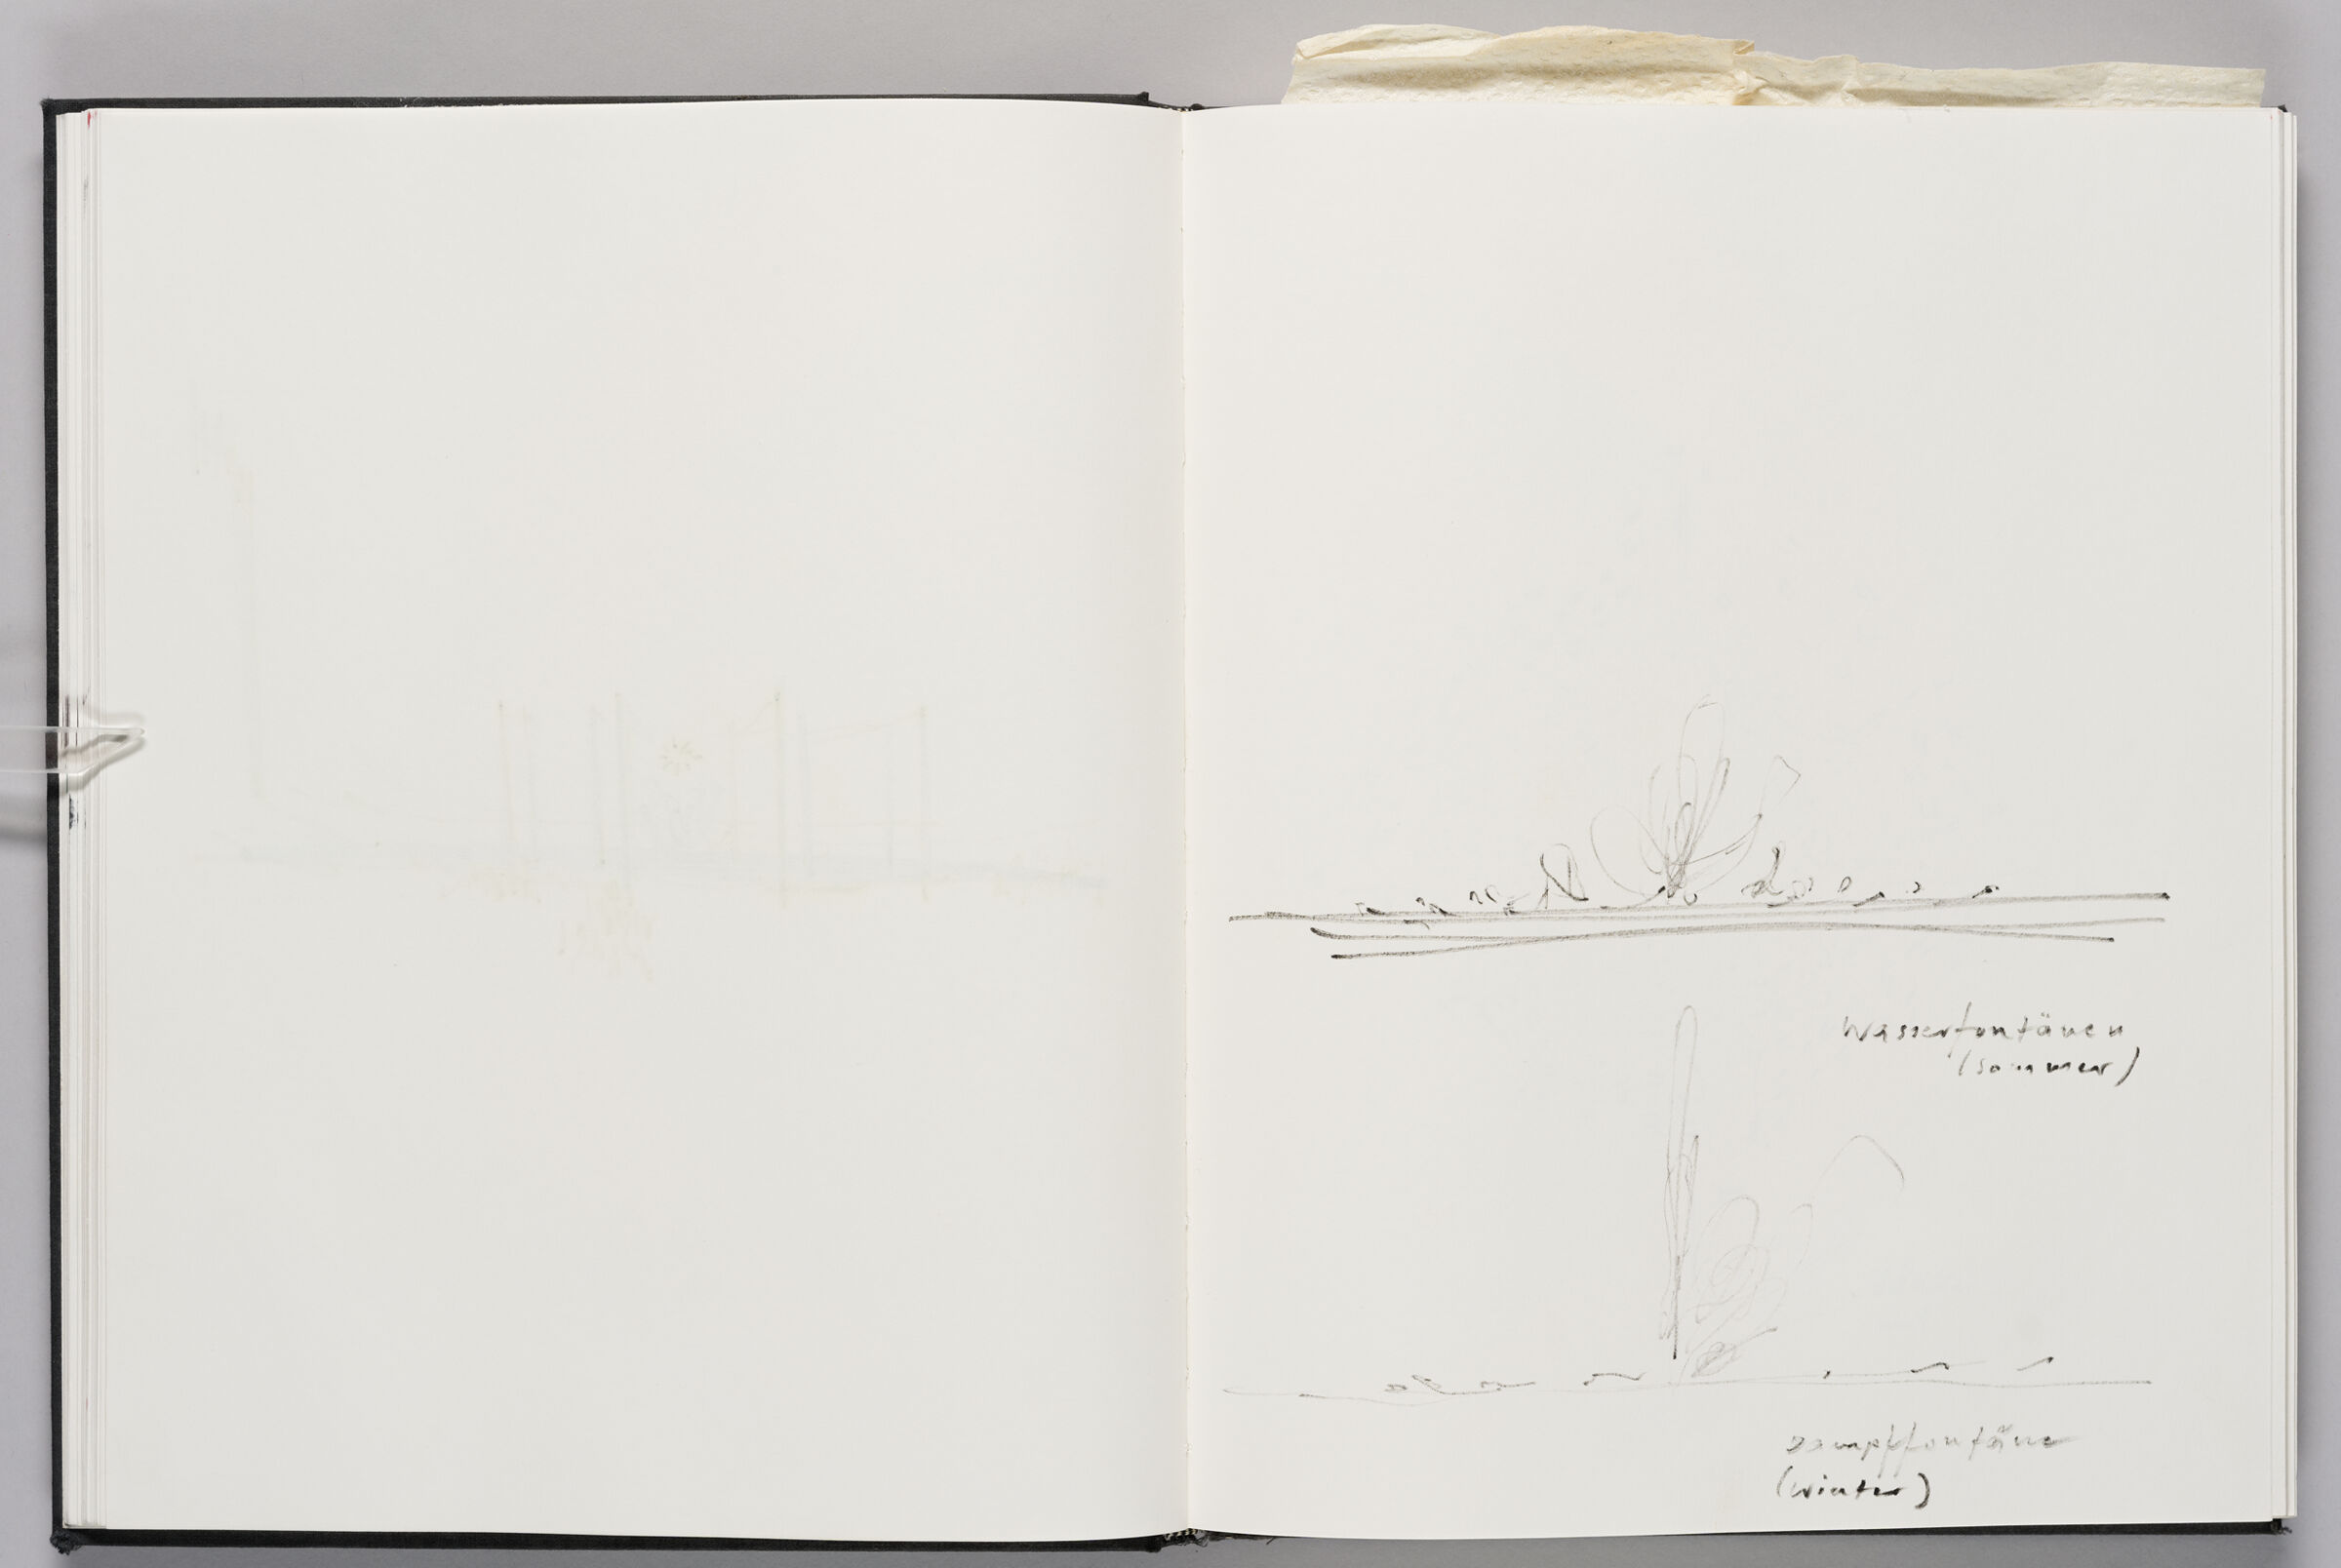 Untitled (Bleed-Through Of Previous Page, Left Page); Untitled (Media Park Fountain Design, Right Page)